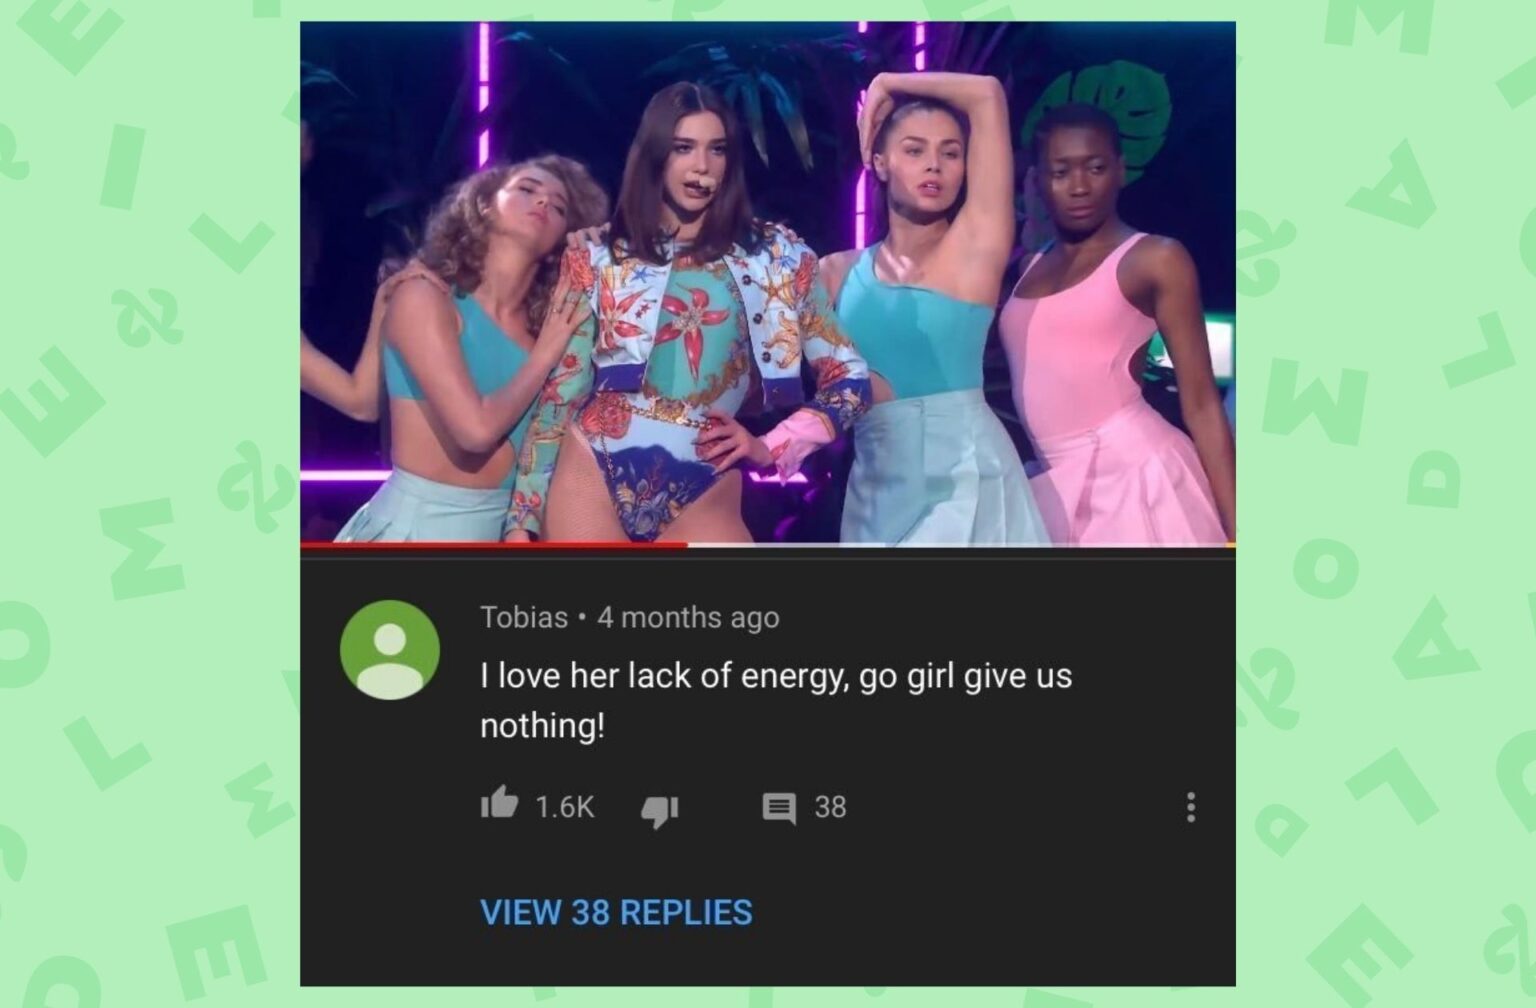 The origin of the famous meme around Dua Lipa, "i love her lack of energy, go girl give us nothing!"